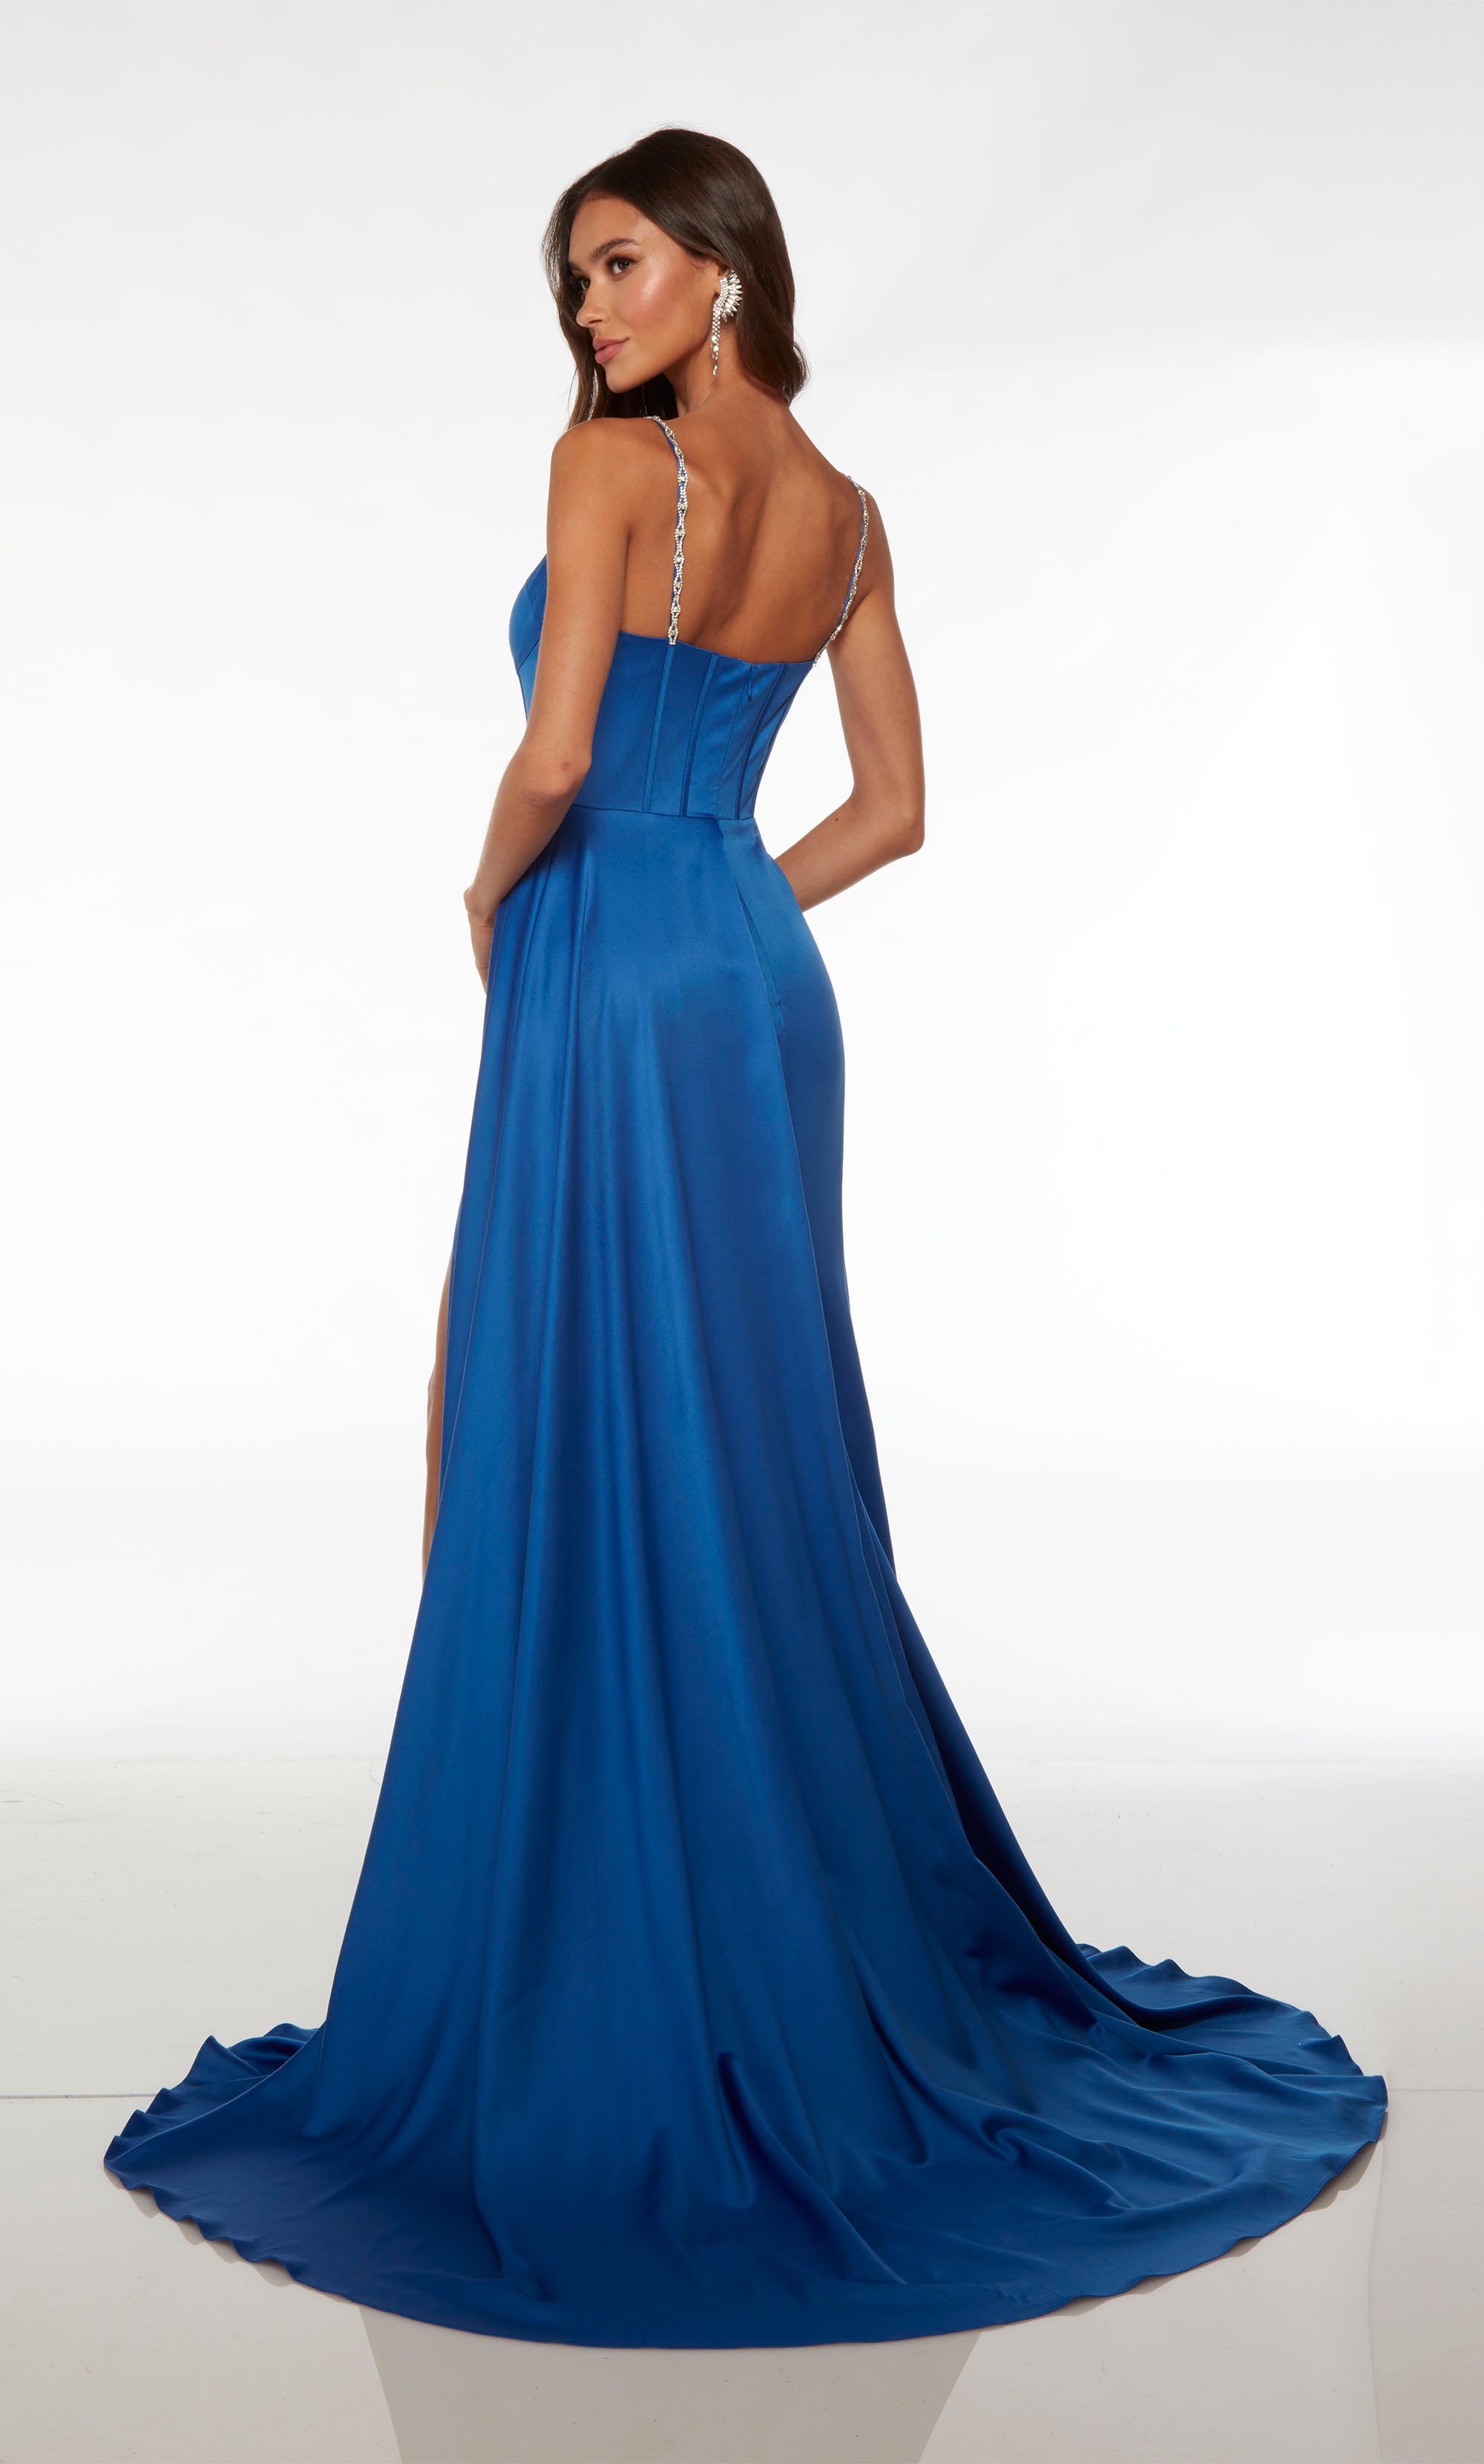 Designer blue satin dress with an modified sweetheart neckline, jeweled straps, corset bodice, high slit, train, and side train for an dramatic and stylish effect.